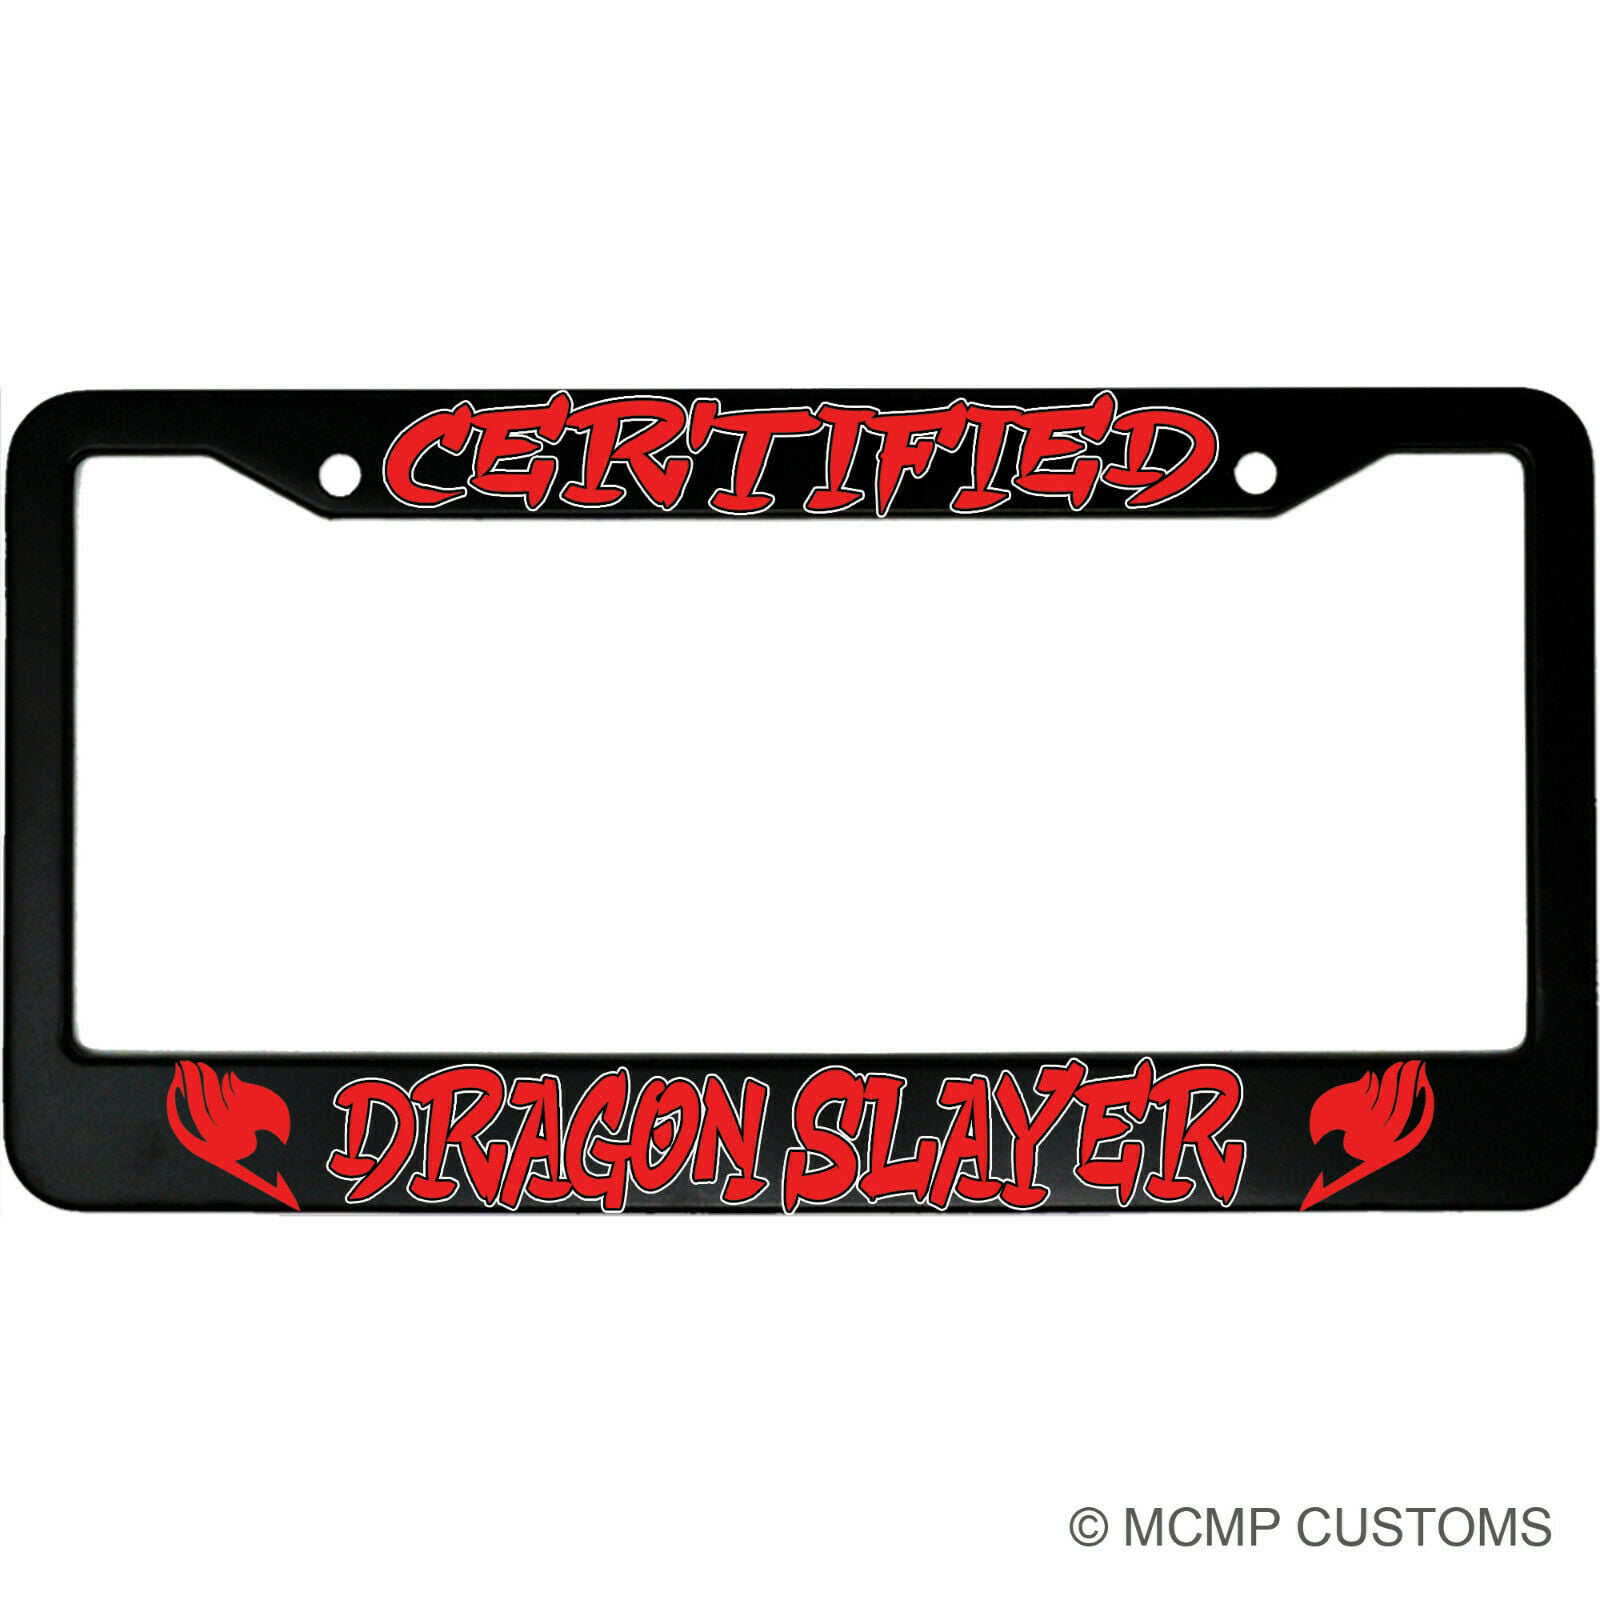 Florida Panthers Team NHL National Hockey League Metal License Plate Frame  for Front or Back of Car Officially Licensed (Up Close)